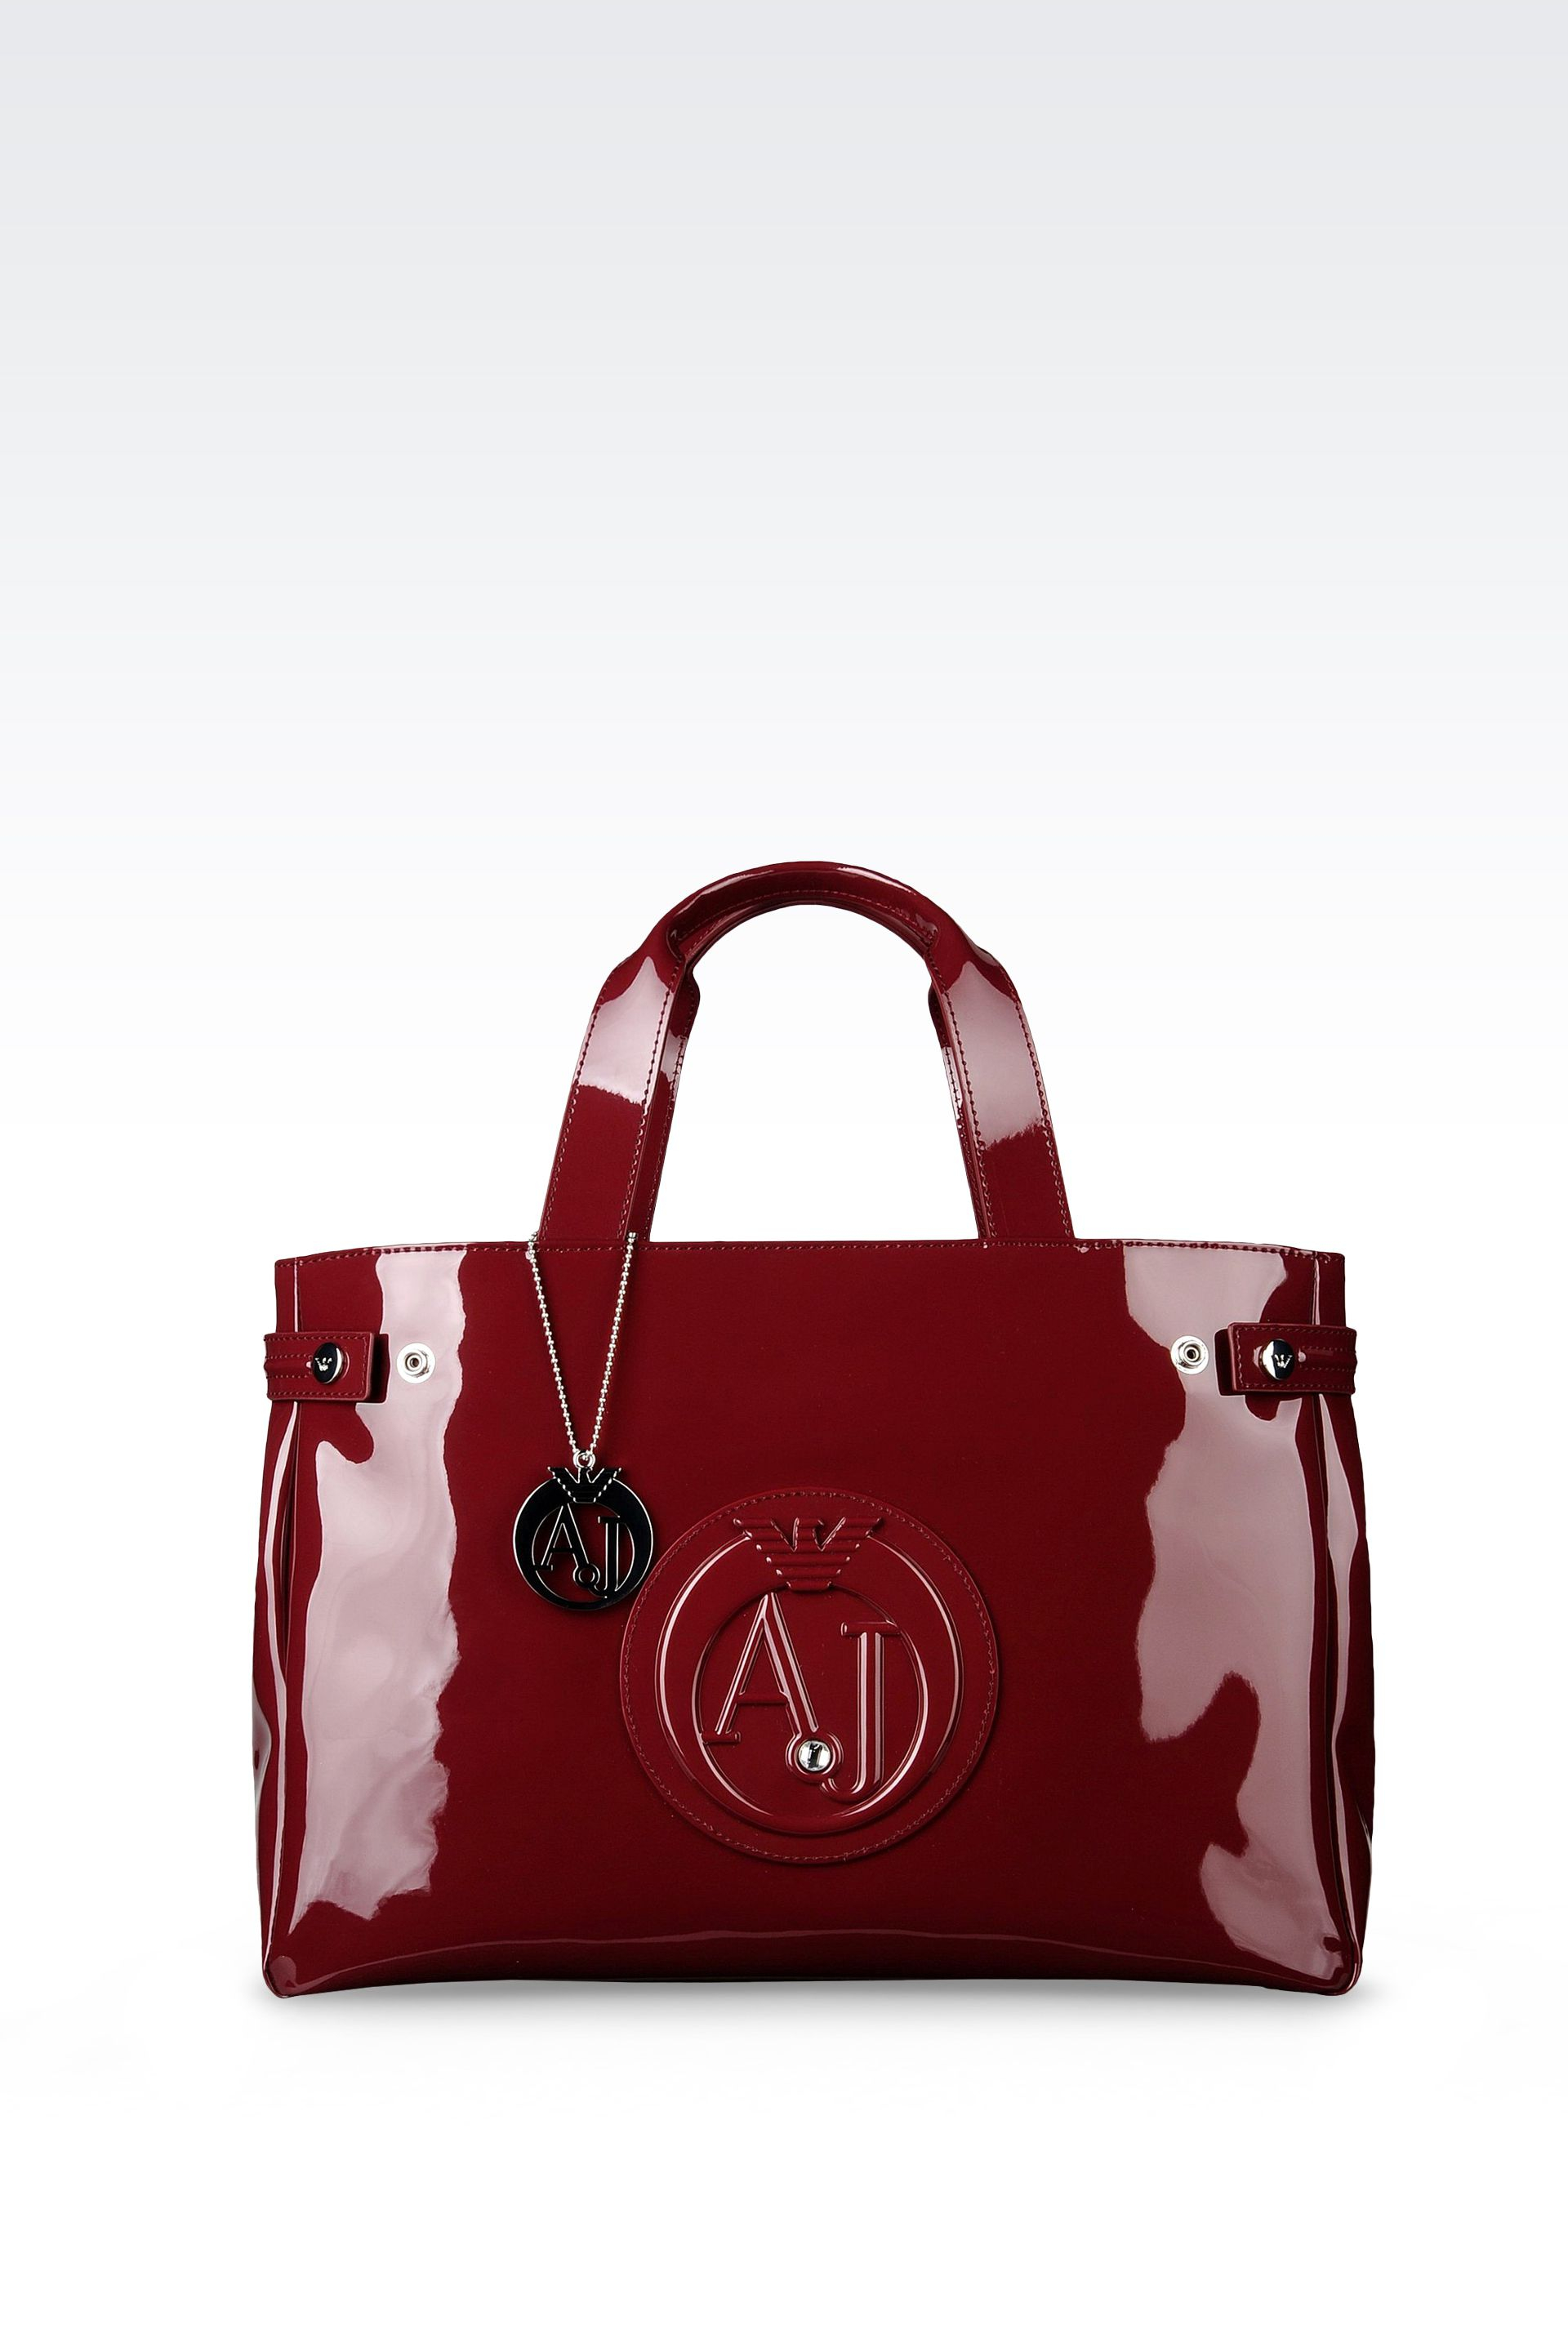 Armani Jeans Shopping Bag in Patent 